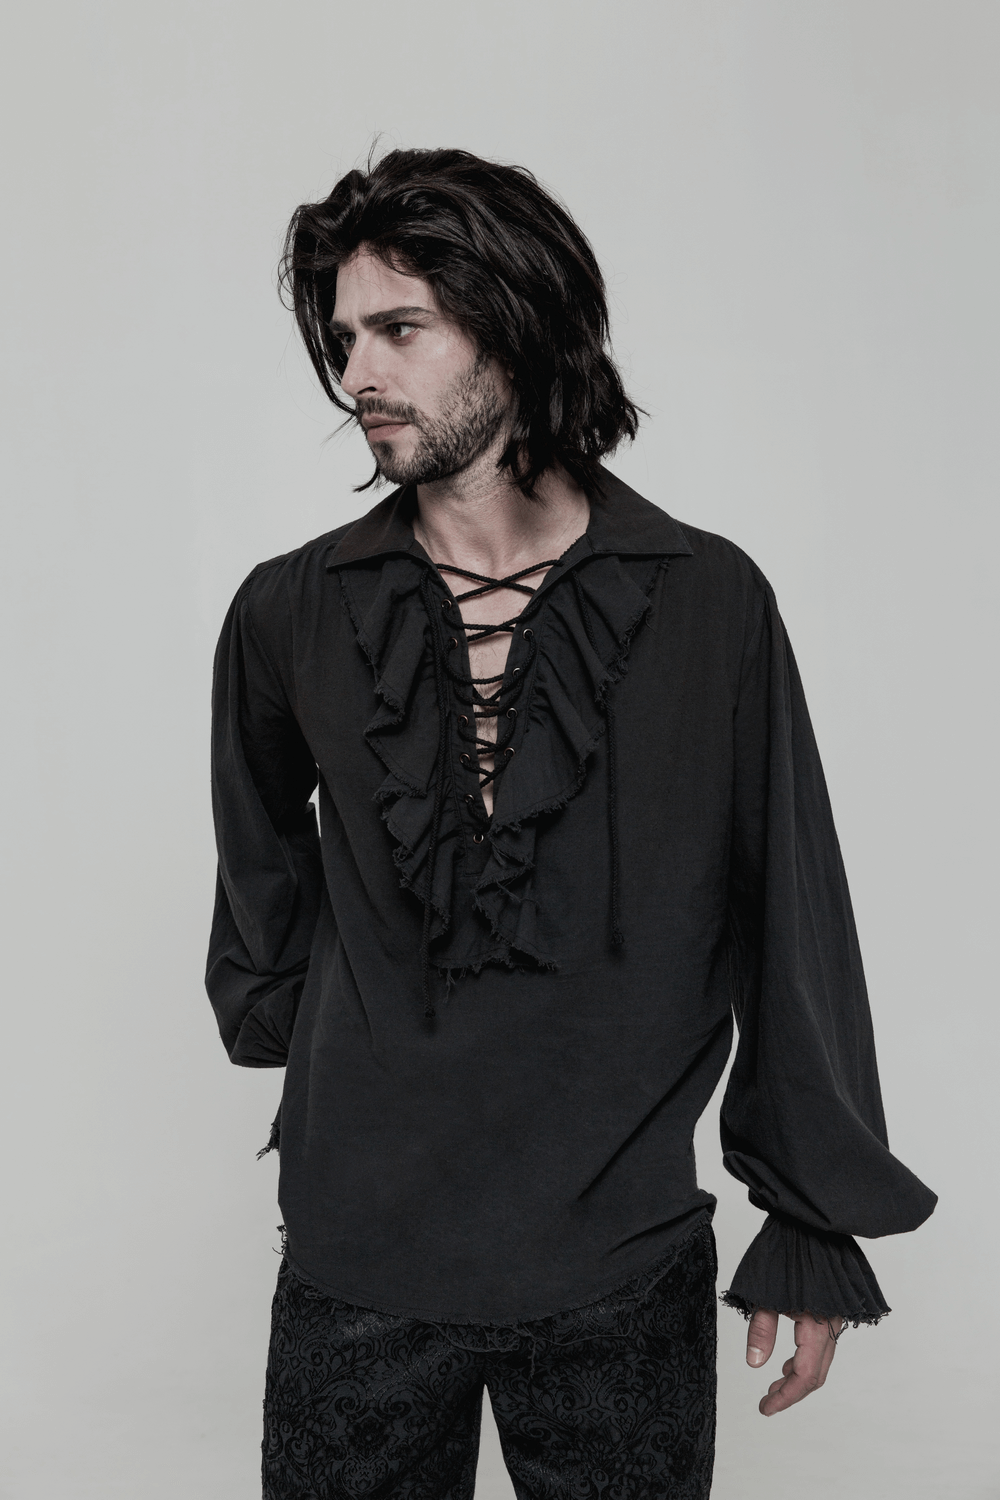 Vintage Men's Long Sleeves Gothic Shirt with Ruffle Front - HARD'N'HEAVY